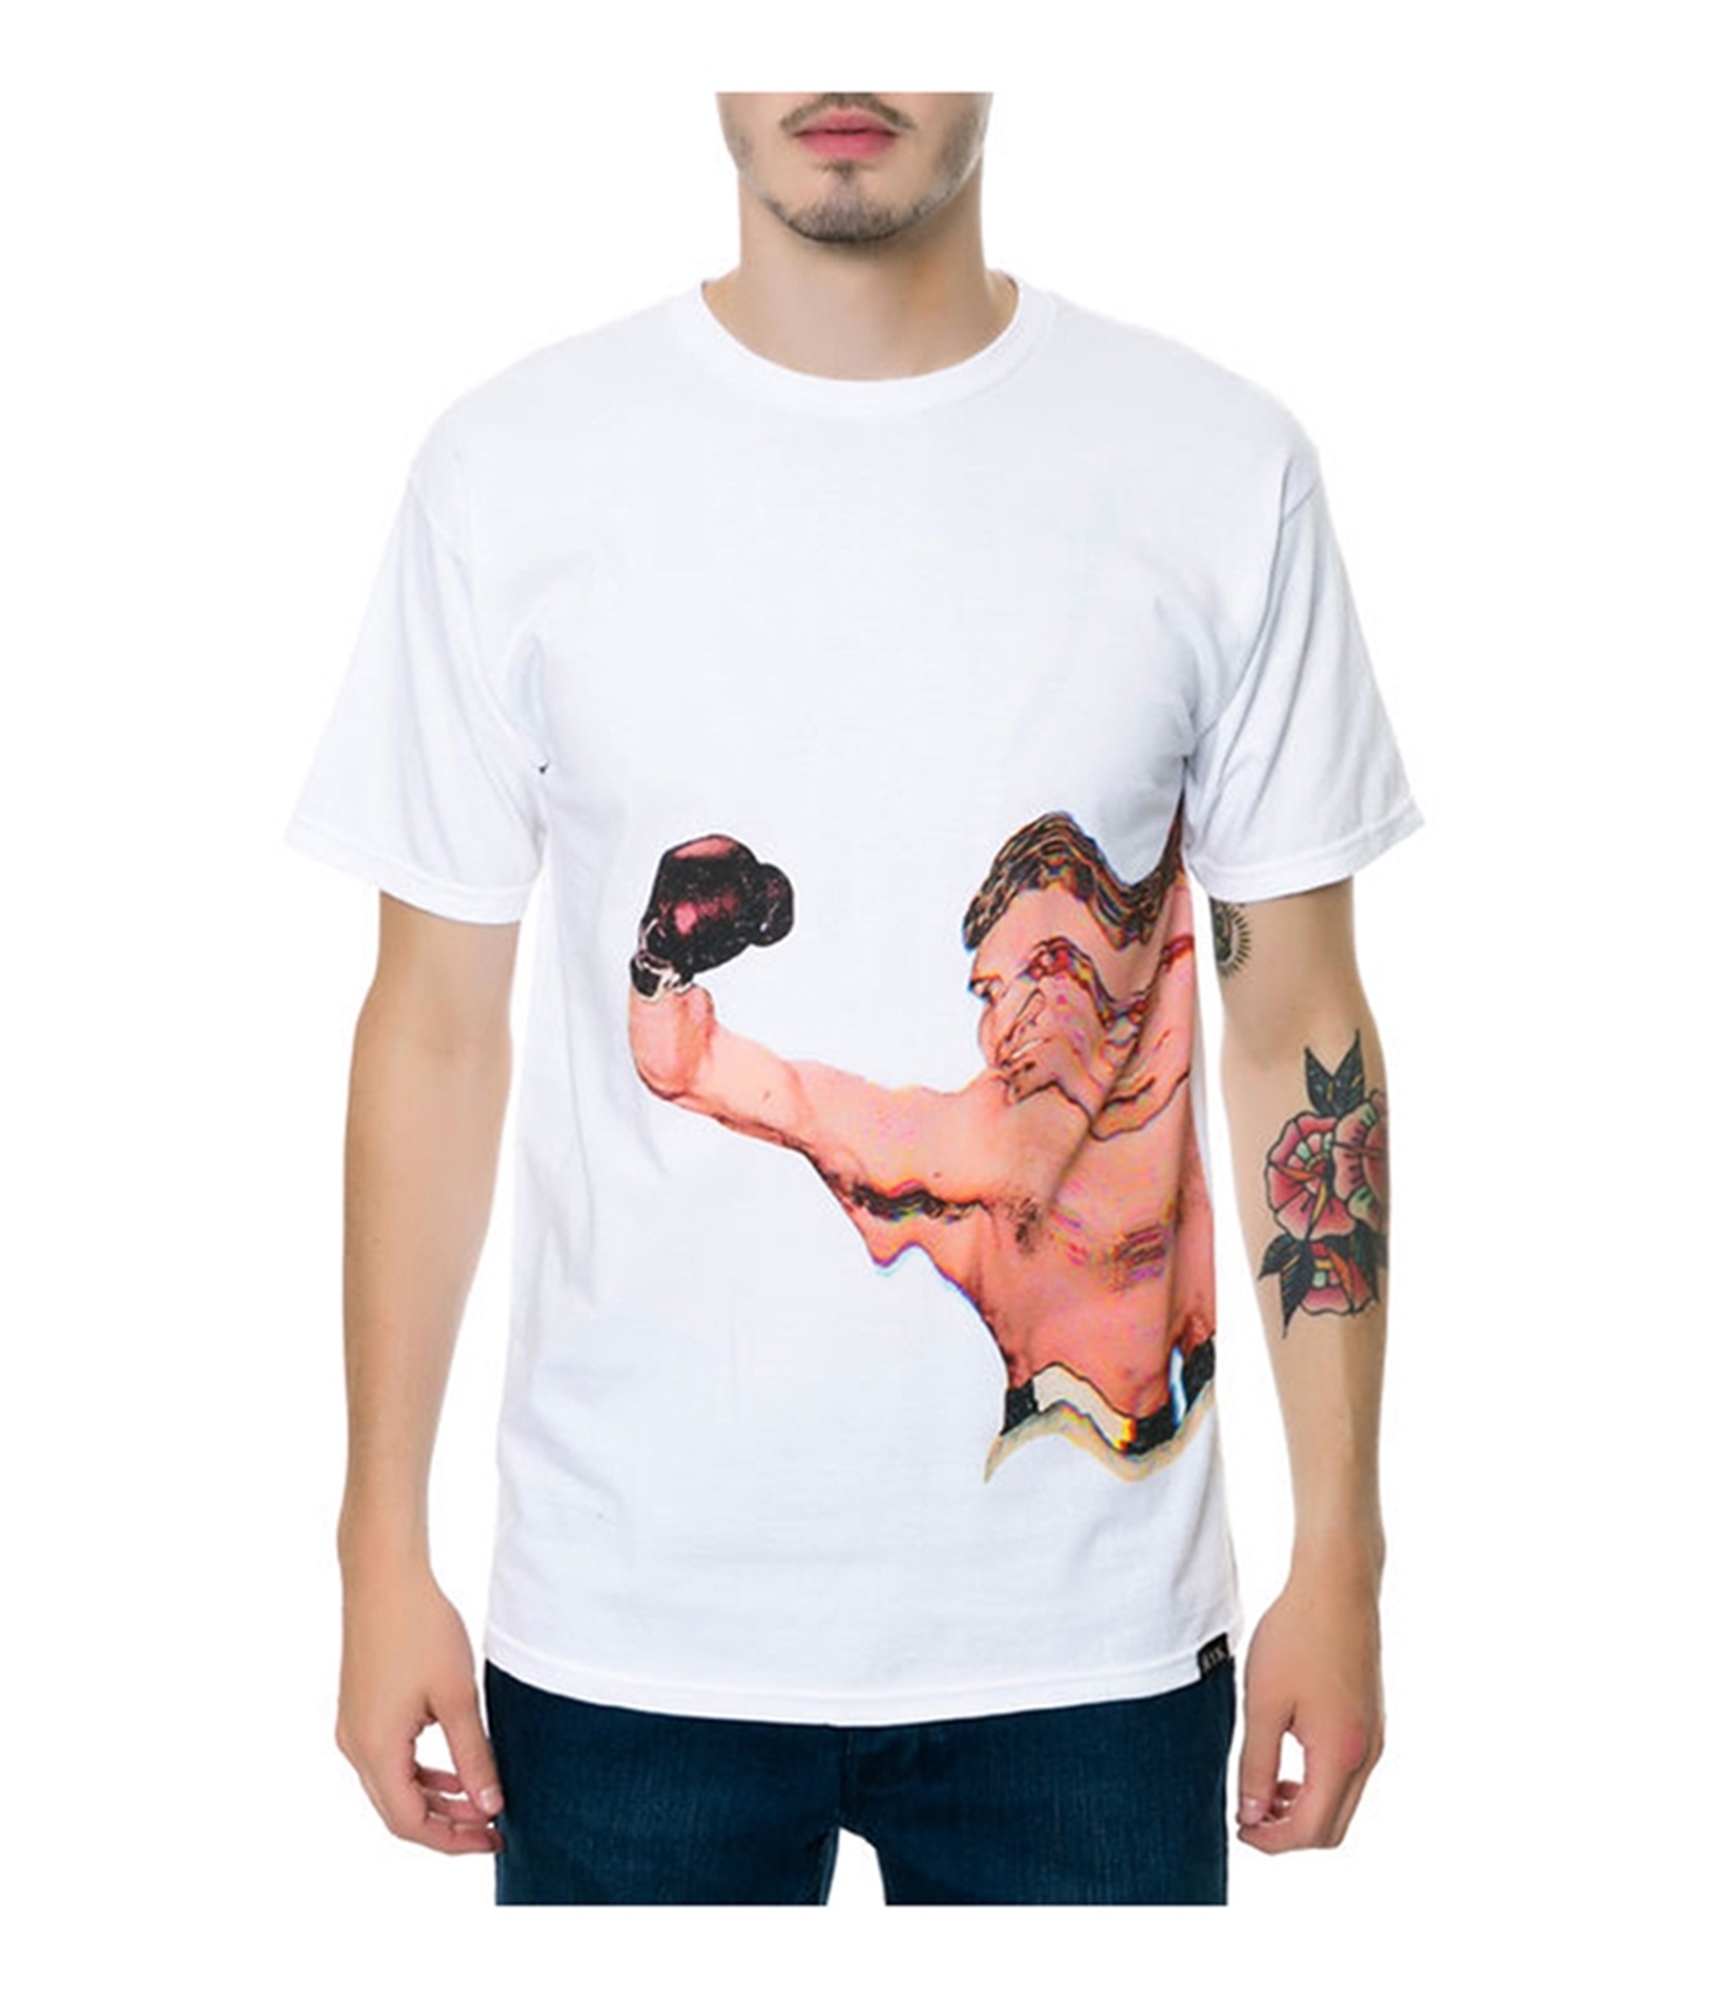 Buy a Mens ROOK The TKO Graphic T-Shirt Online | TagsWeekly.com